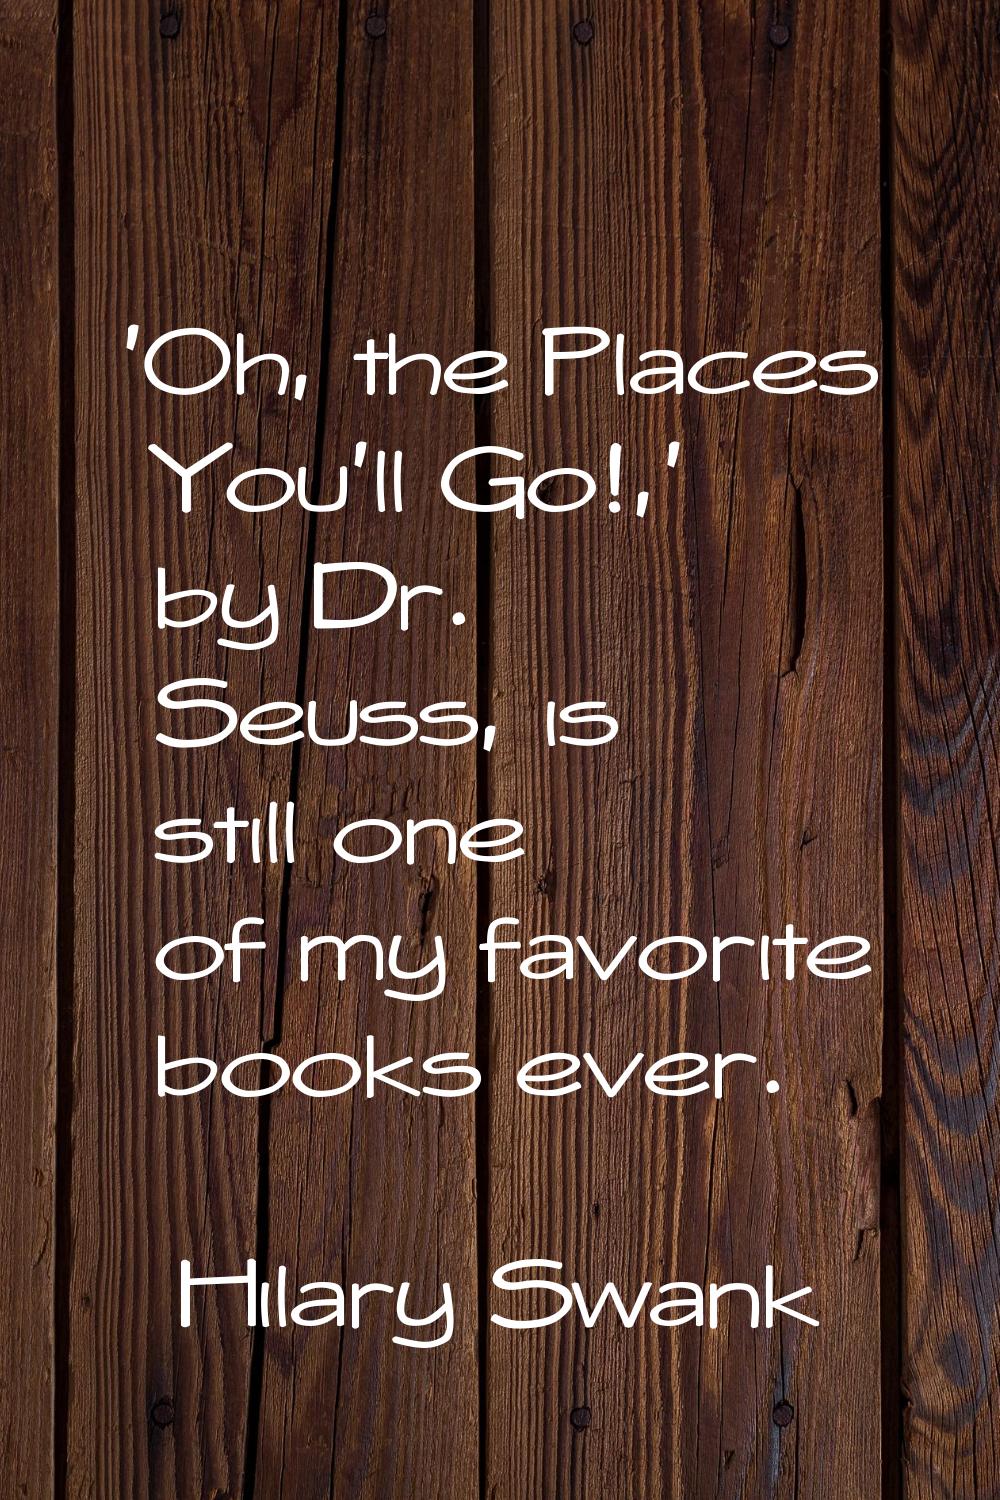 'Oh, the Places You'll Go!,' by Dr. Seuss, is still one of my favorite books ever.